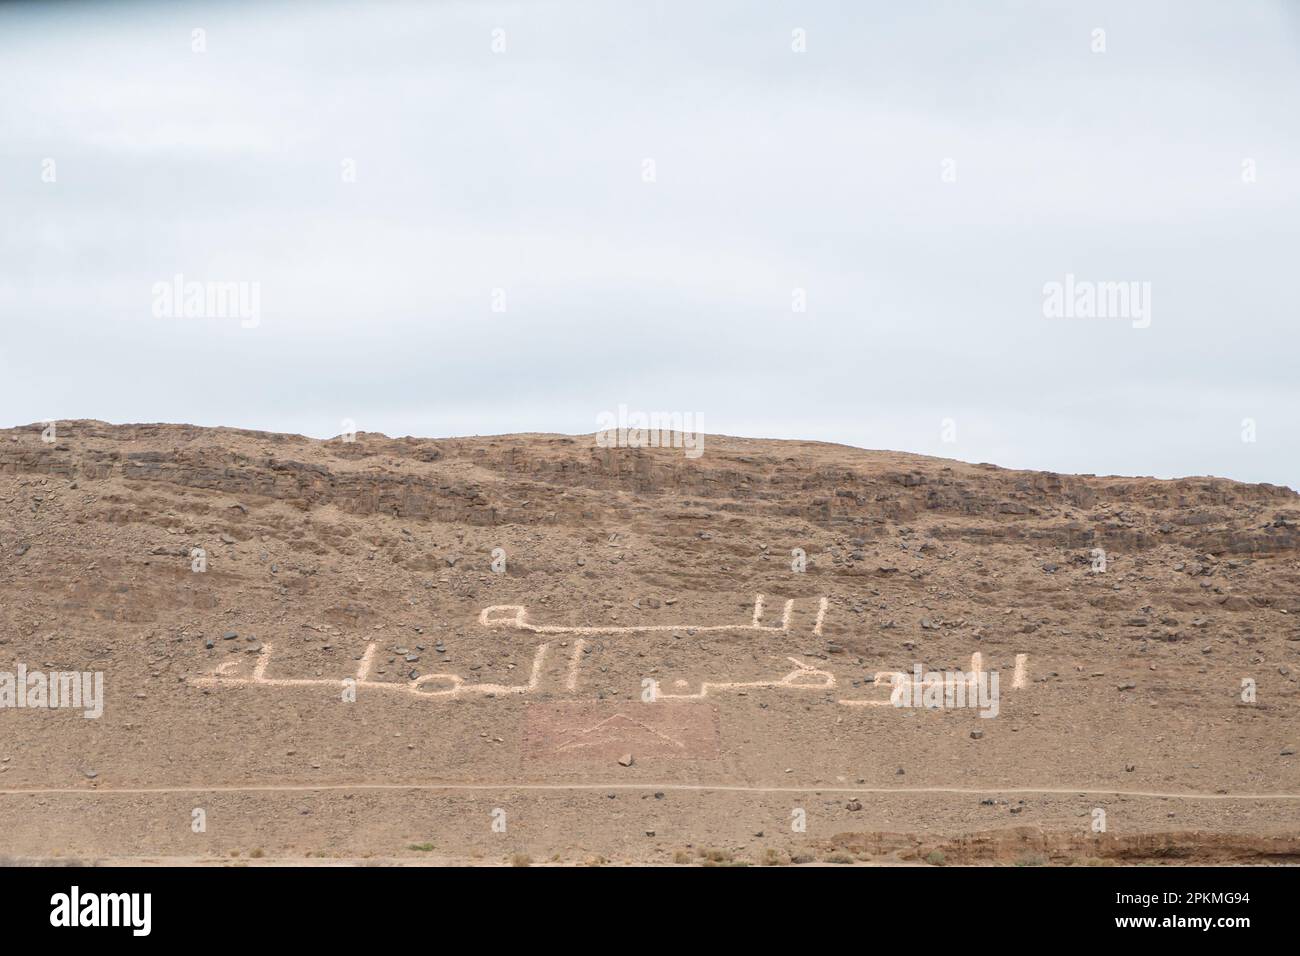 Ancient script in the sand near Todra Gorge Stock Photo